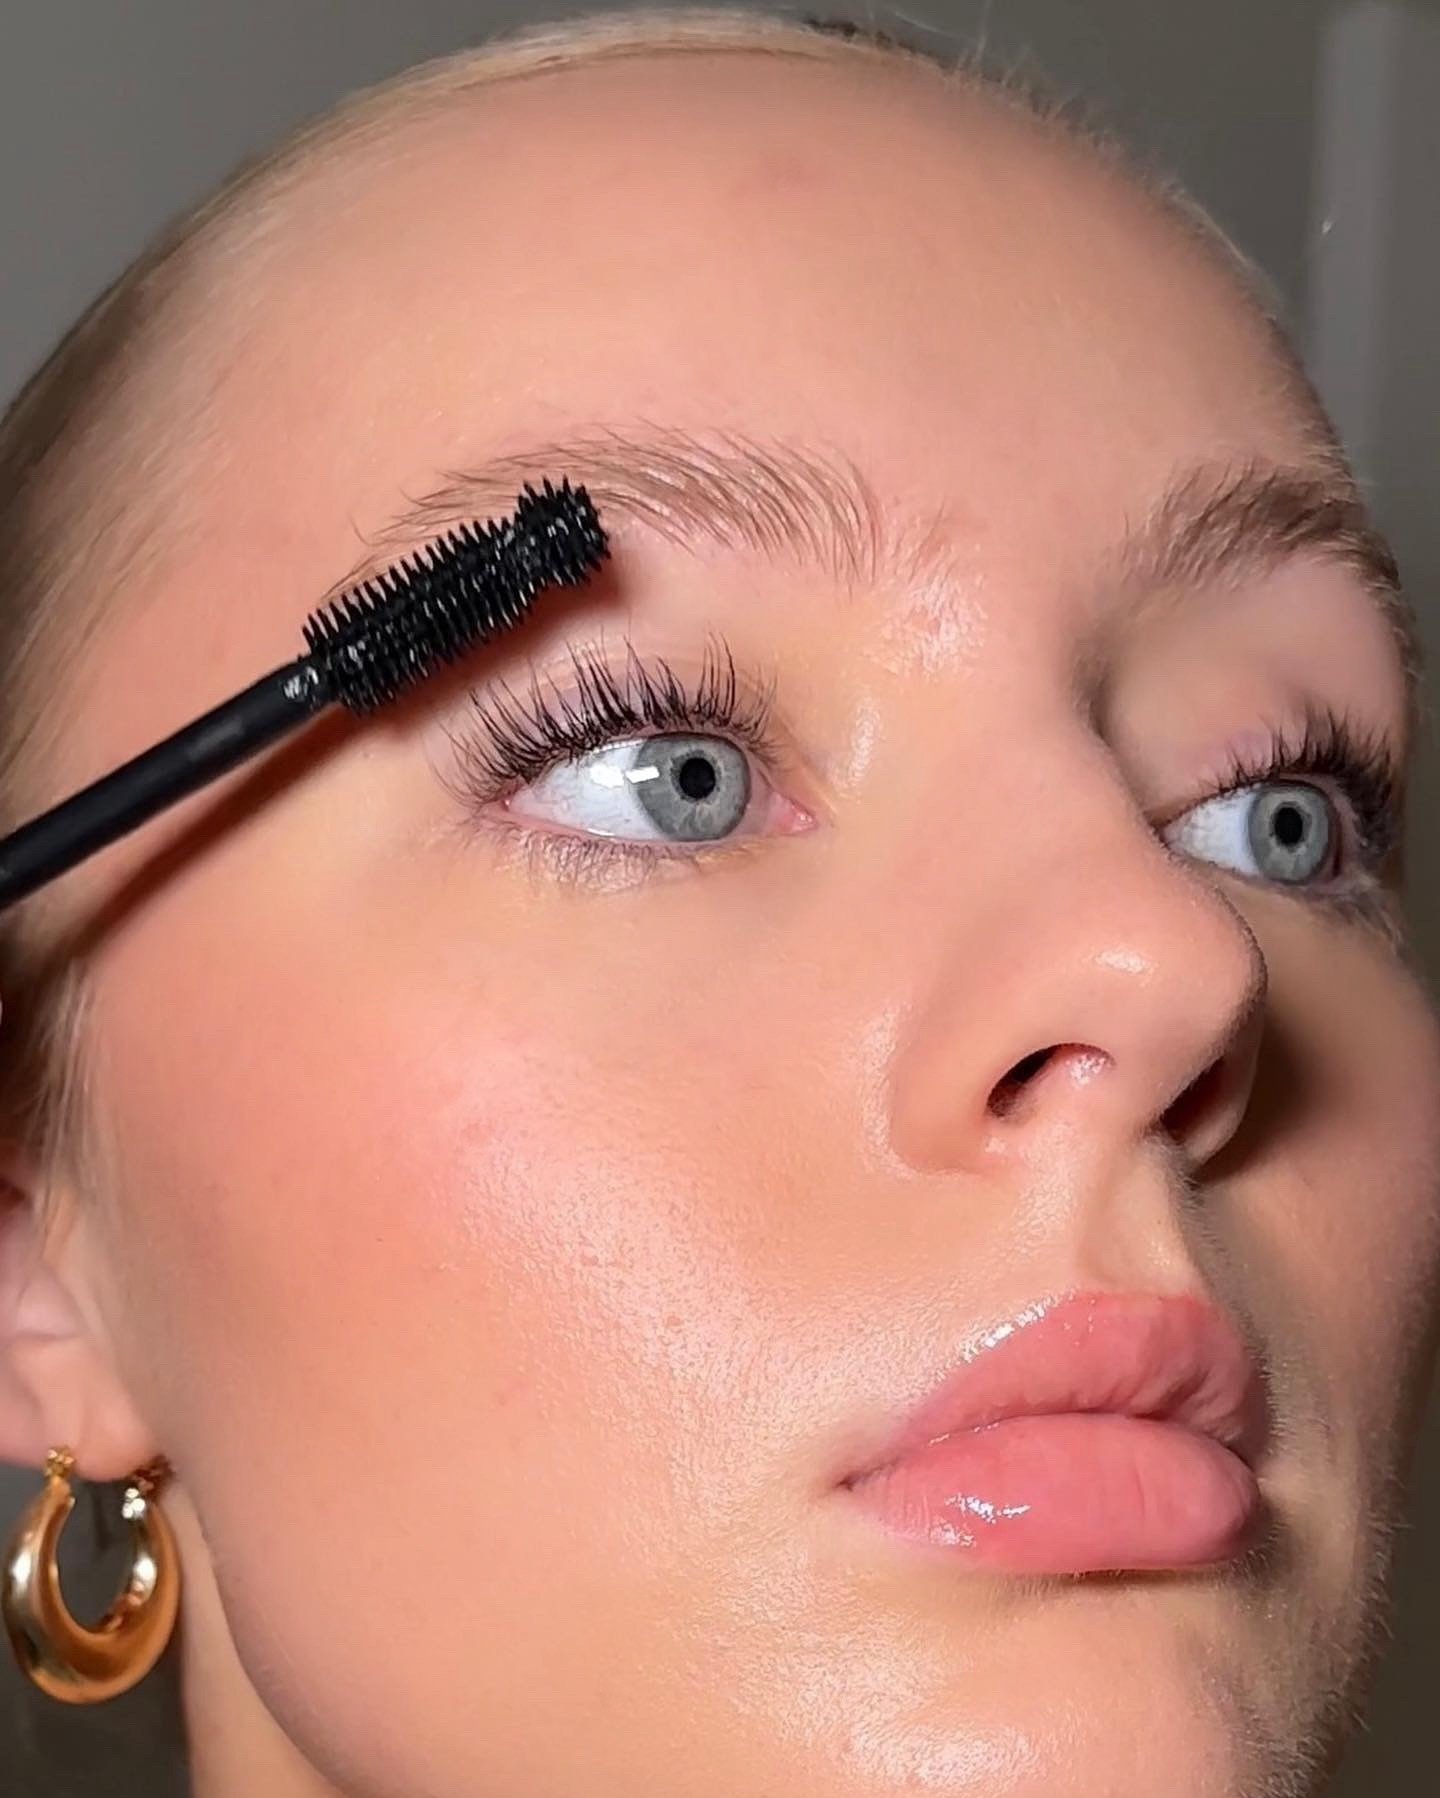 lifted lashes using BOO by @browposse + a coasting of mascara 🤠